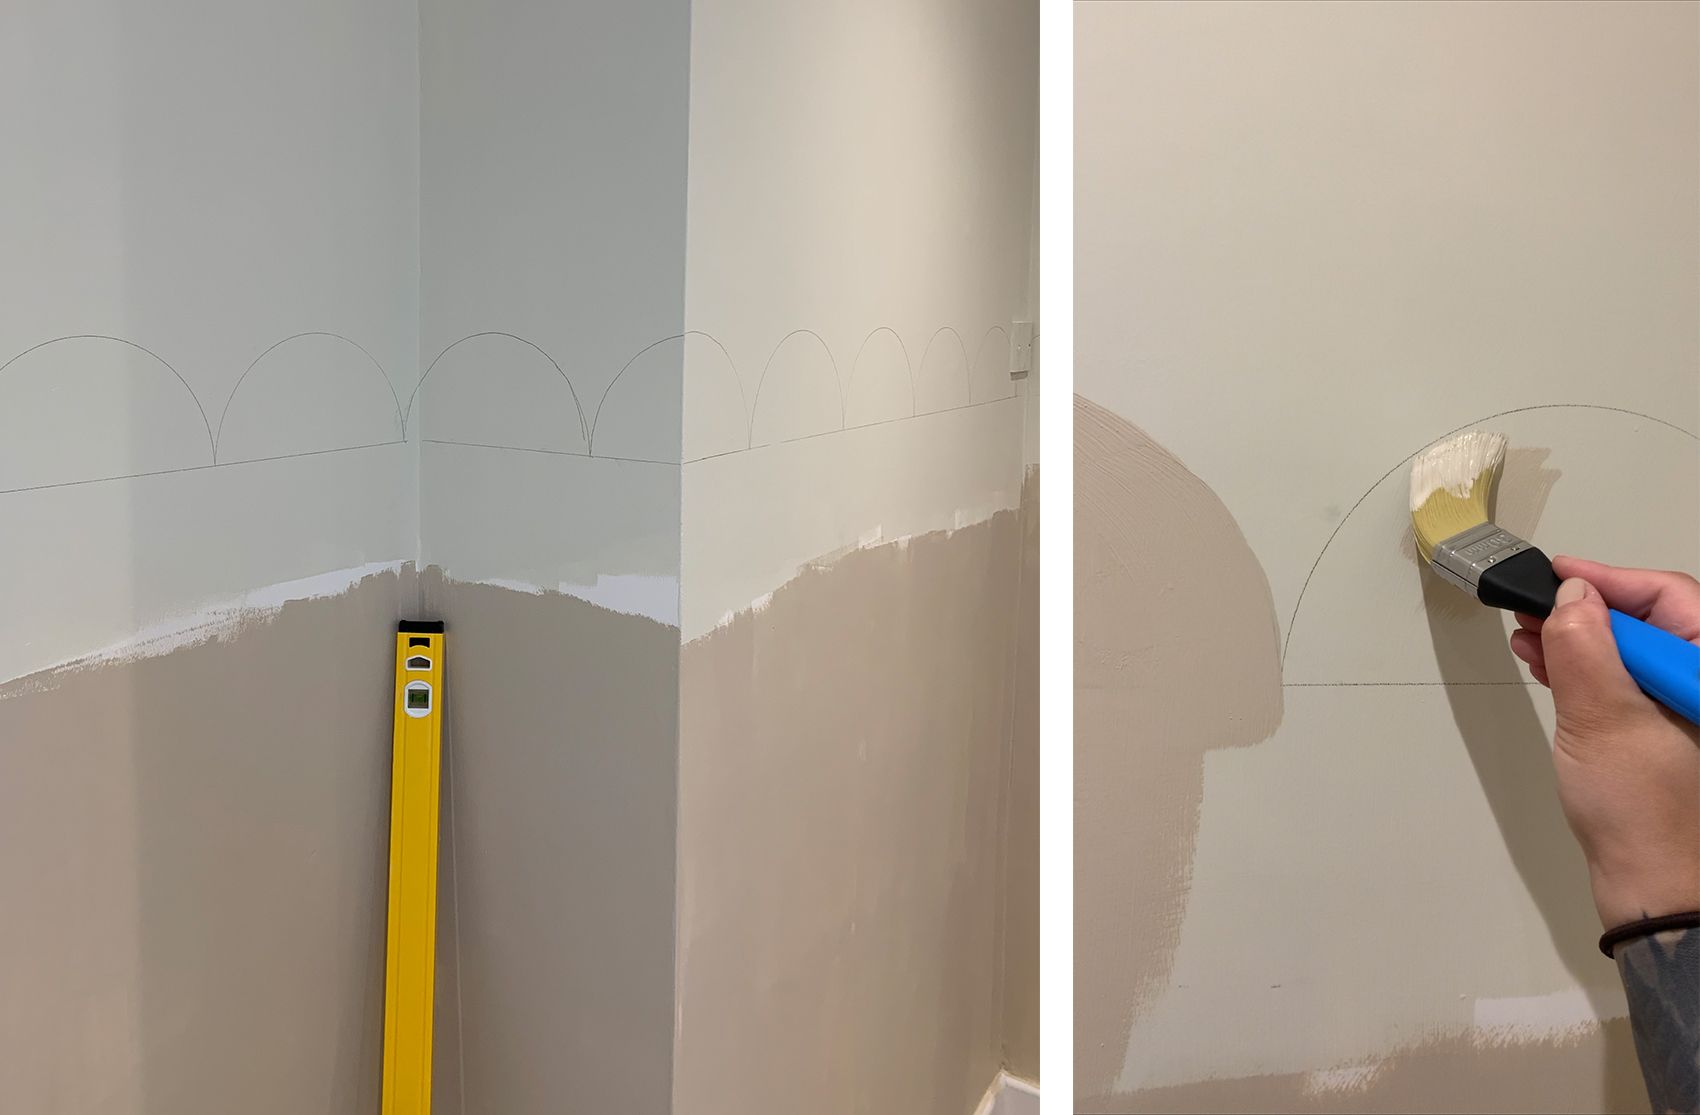 How To Paint a Scalloped Edge Wall - Step by Step Guide